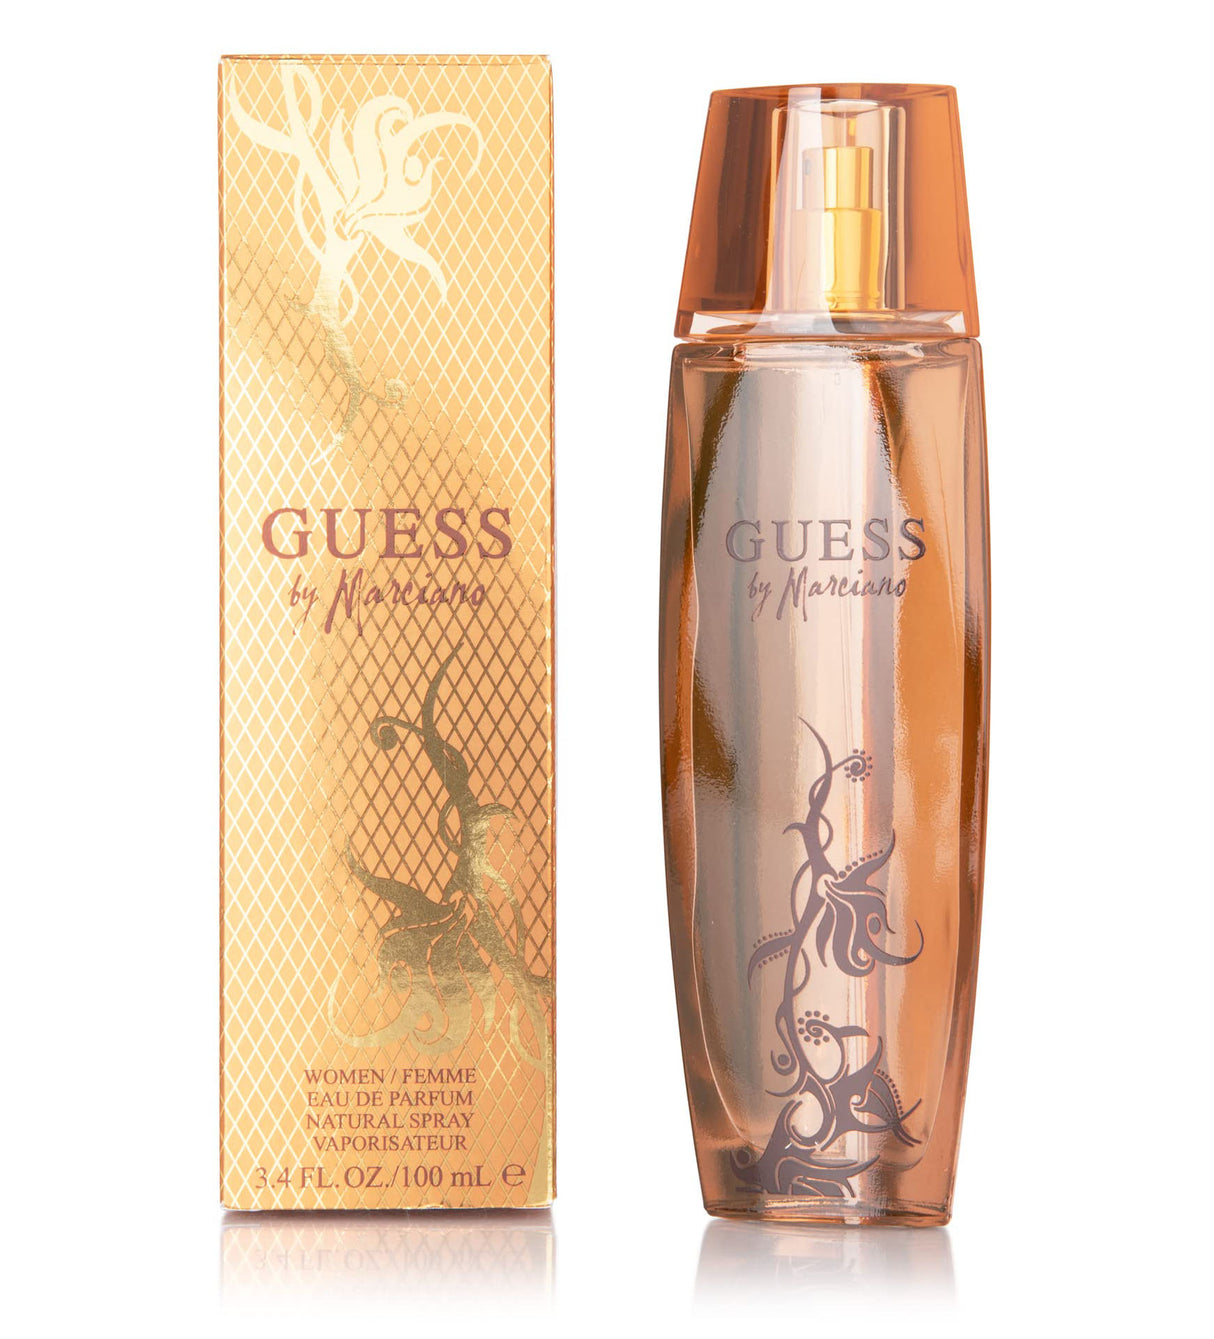 Guess by Marciano W, Perfume de Mujer 3.4 oz